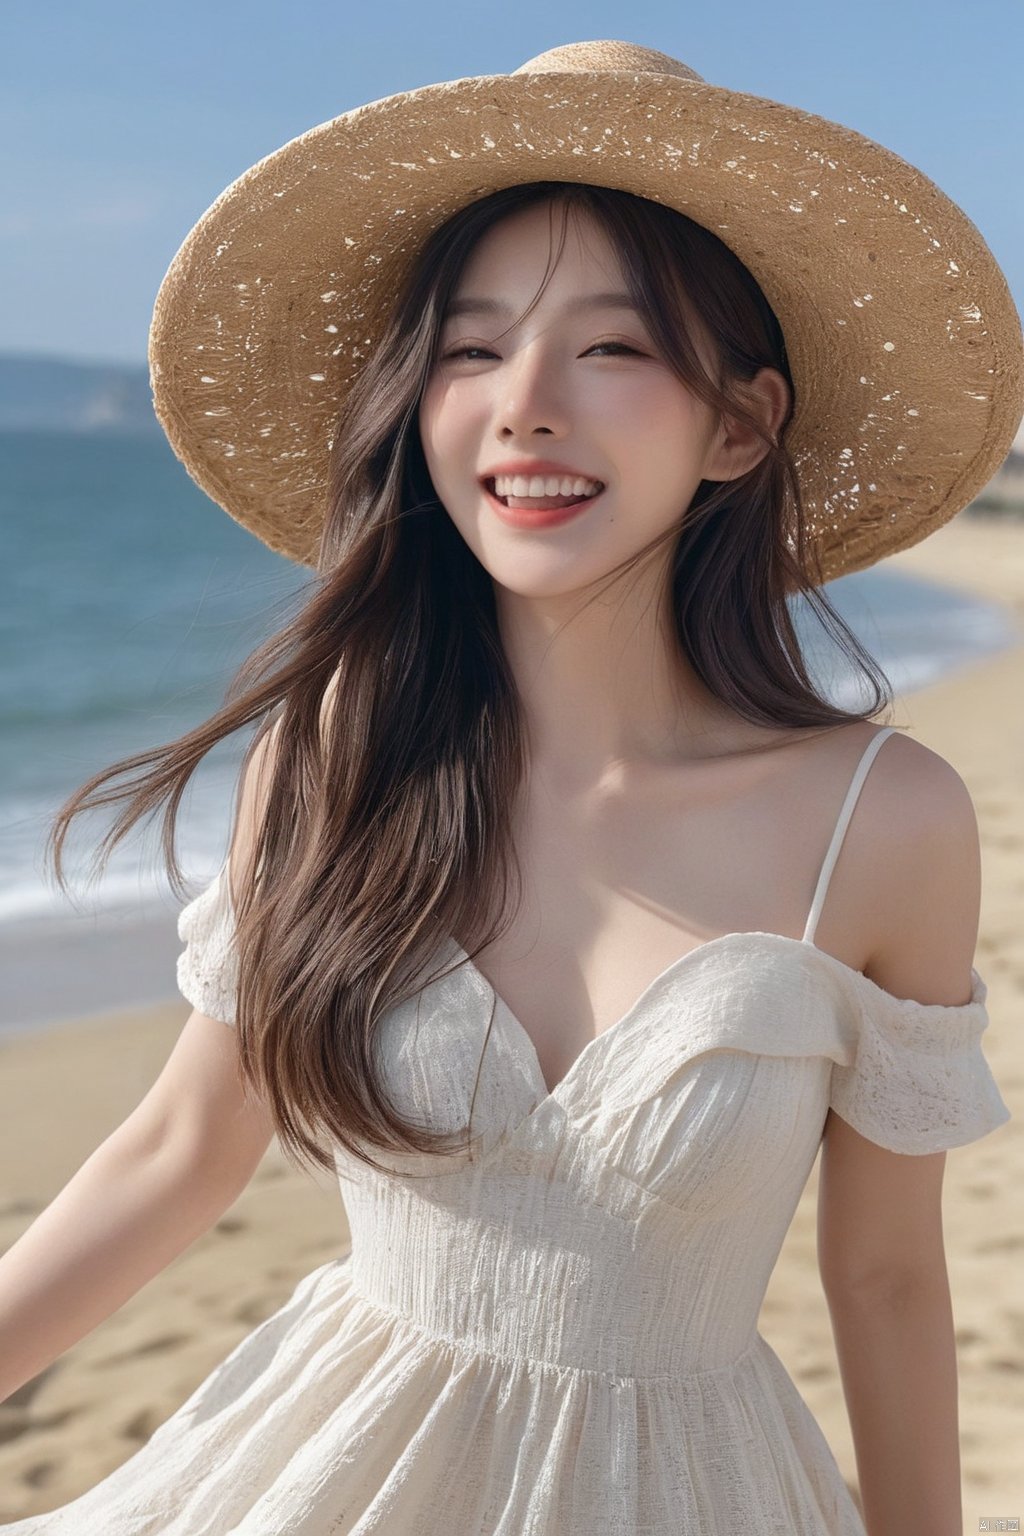 masutepiece, Best Quality, Ultra-detailed, finely detail, hight resolution, 8K Wallpaper, Perfect dynamic composition, Natural Color Lip, Korean girl, laugh, (wearing a straw hat and a dress:1.1), (Long hair:1.3), (The wind blows my long hair:1.3), breasts, dynamic pose, facing reality, 20 years girl, fullbody shot, Realism, coast background,